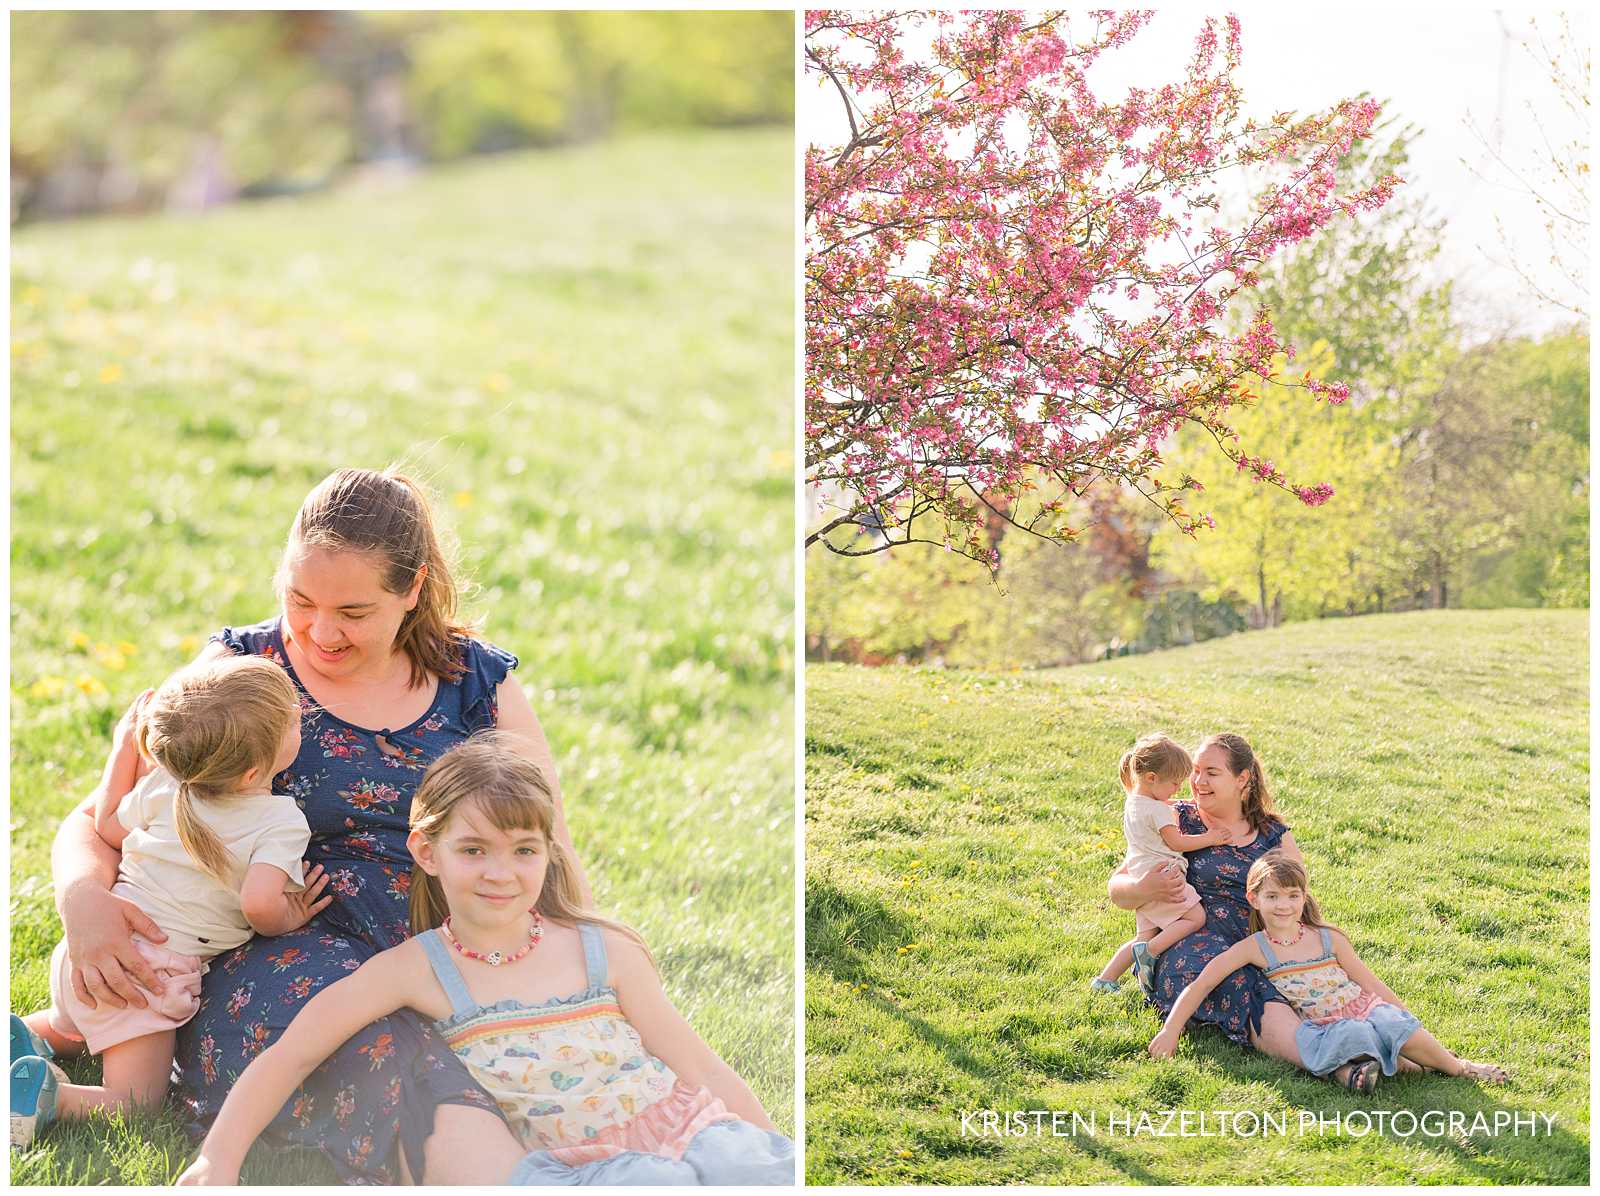 Euclid Square Park family photos of a mother and daughters hugging under pink crabapple blossoms